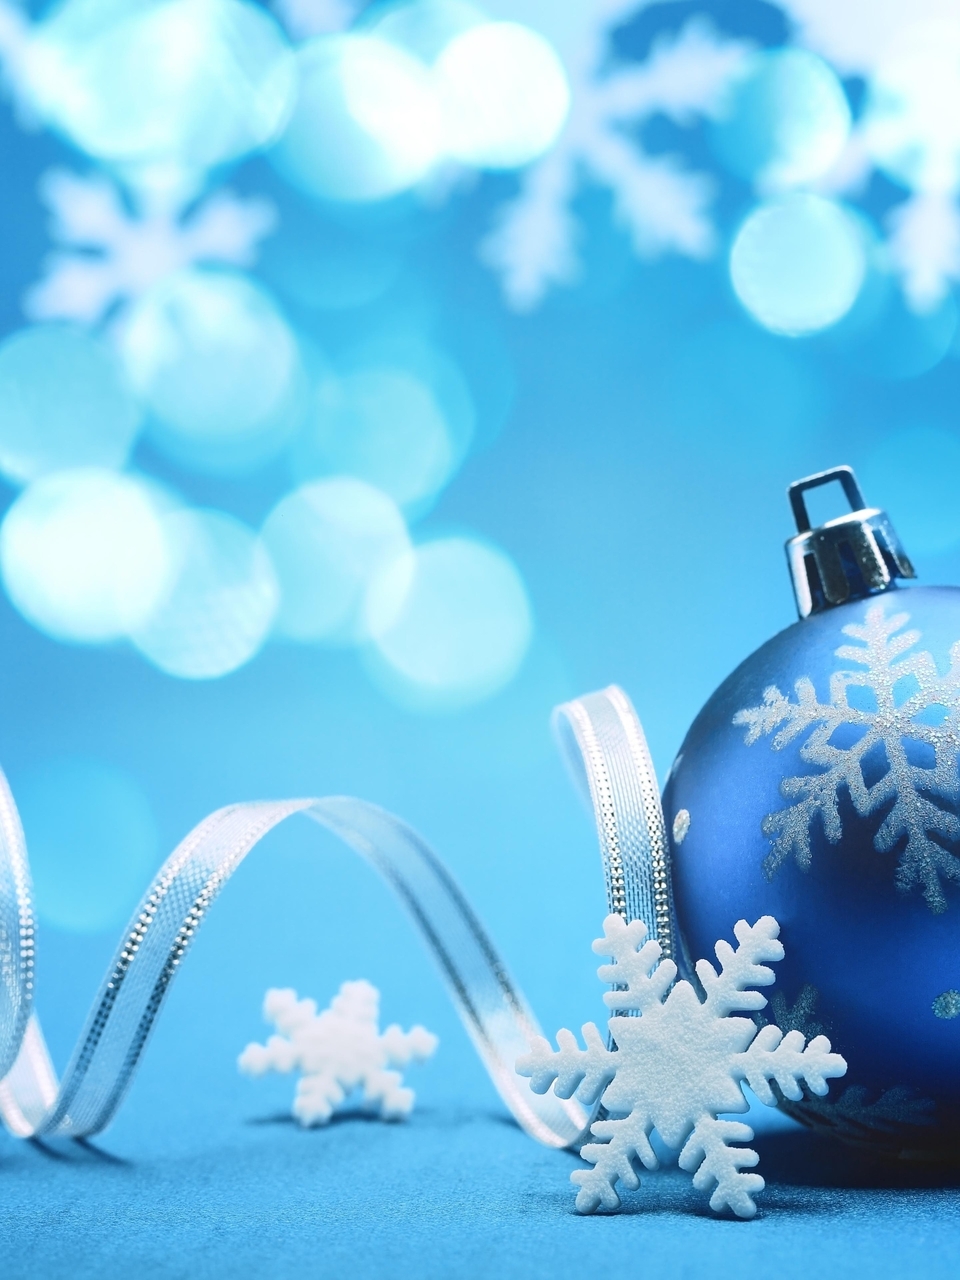 Image: New year, ball, toy, ribbon, blue background, snowflakes